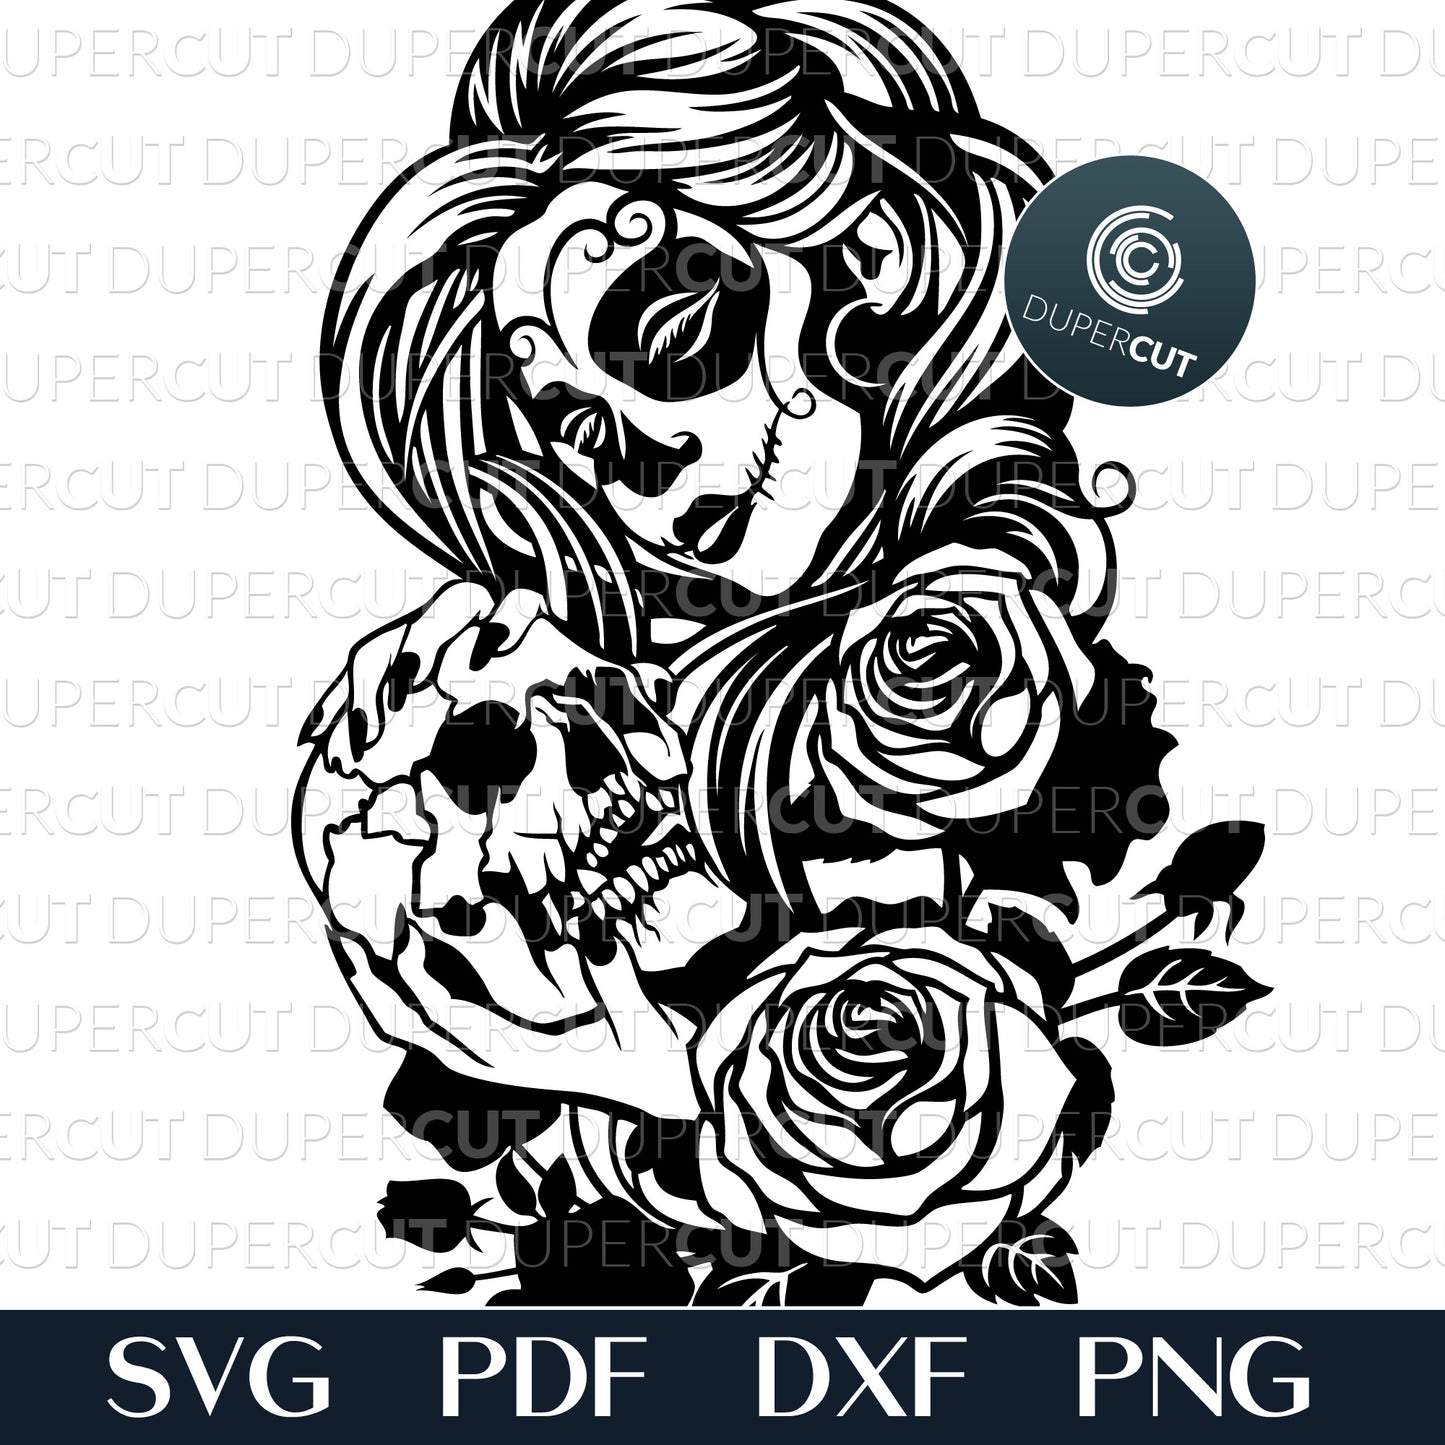 Sugar skull girl with skull head and roses - SVG DXF PNG files for cutting, engraving, sublimation. Great for Cricut, Silhouette Cameo, Glowforge.